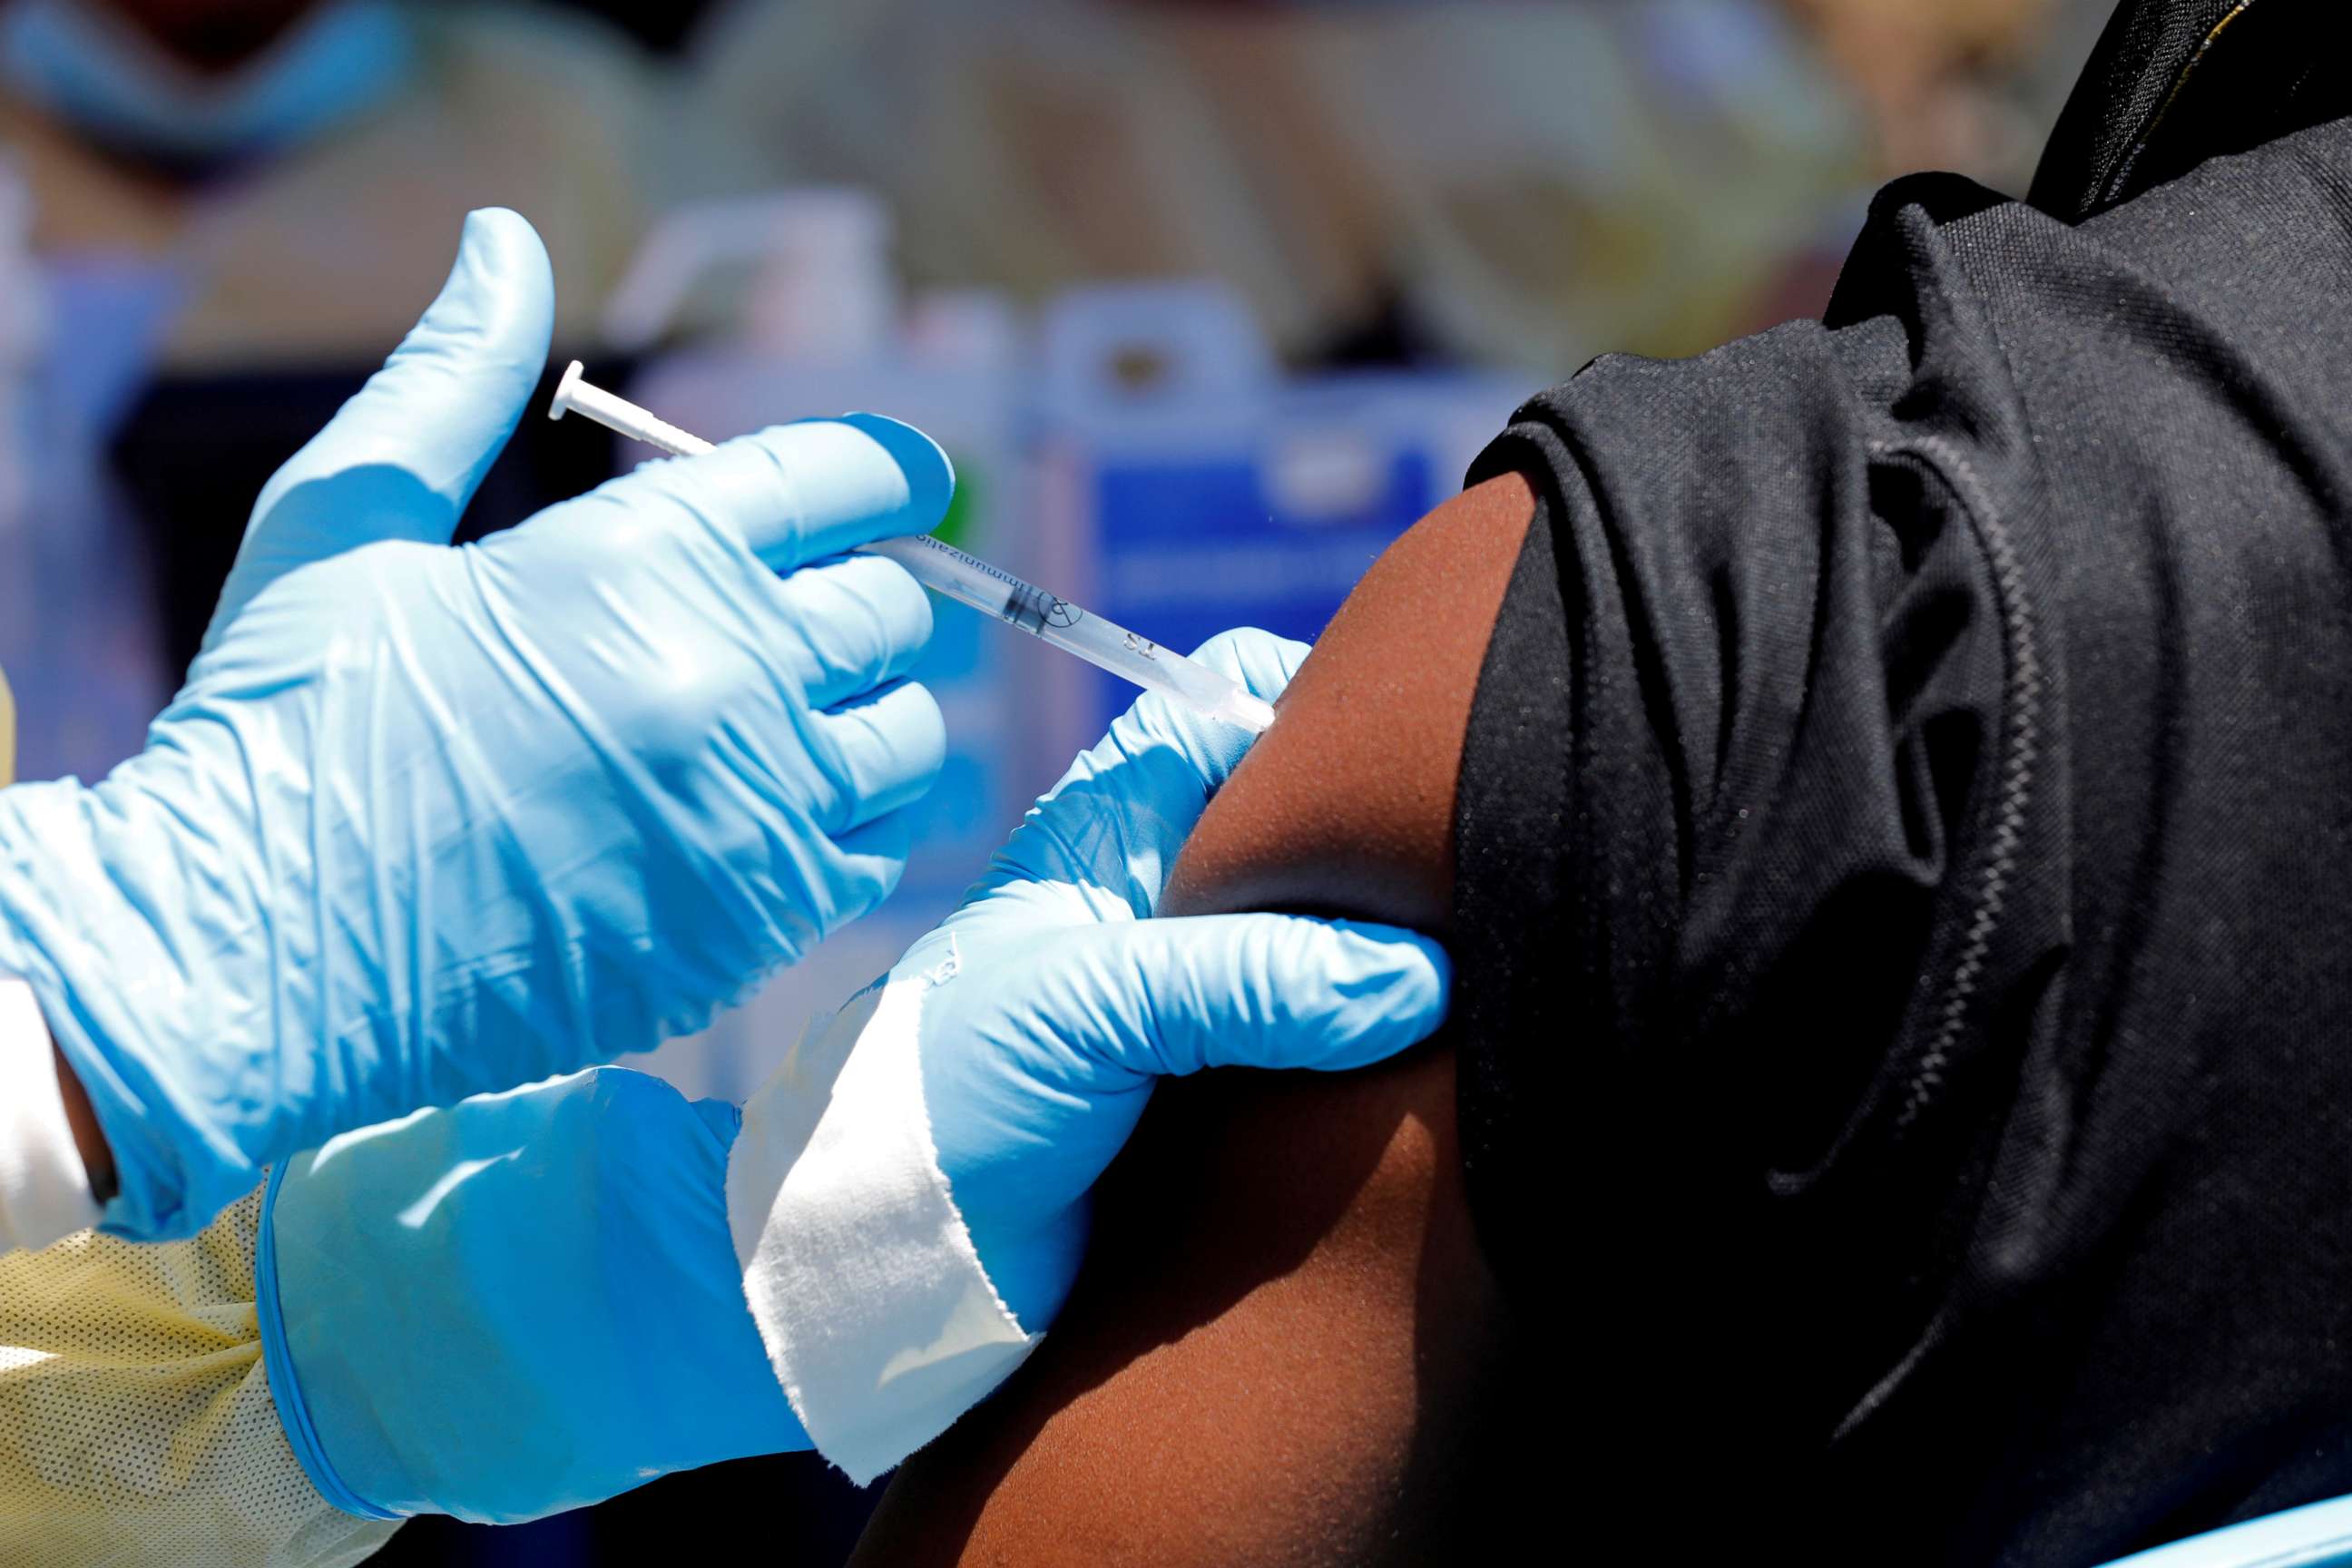 FILE PHOTO: A health worker injects a man with an Ebola vaccine in Goma, Democratic Republic of Congo, Aug. 5, 2019.